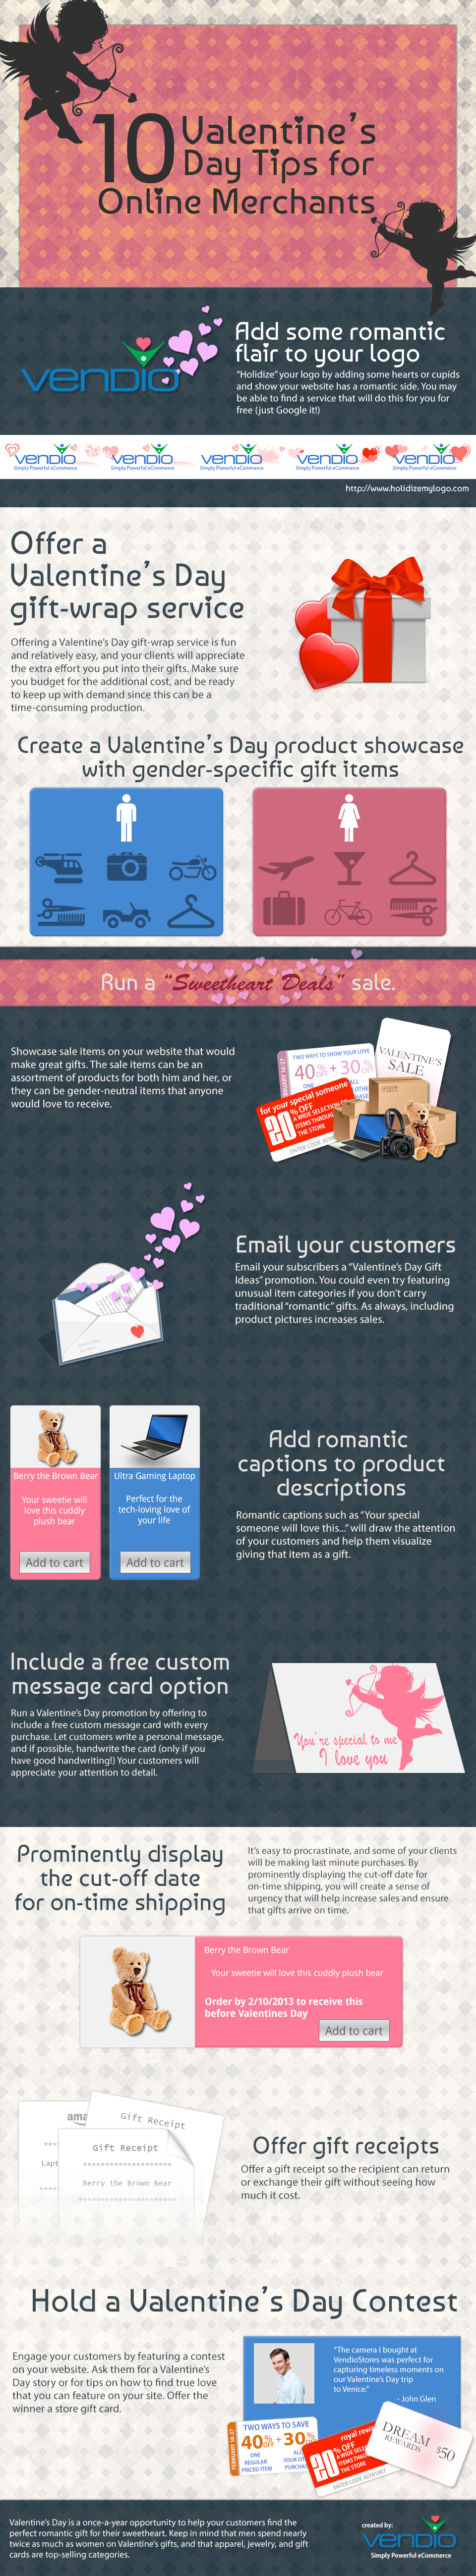 10 Valentine's Day Tips for Ecommerce SMB Merchants